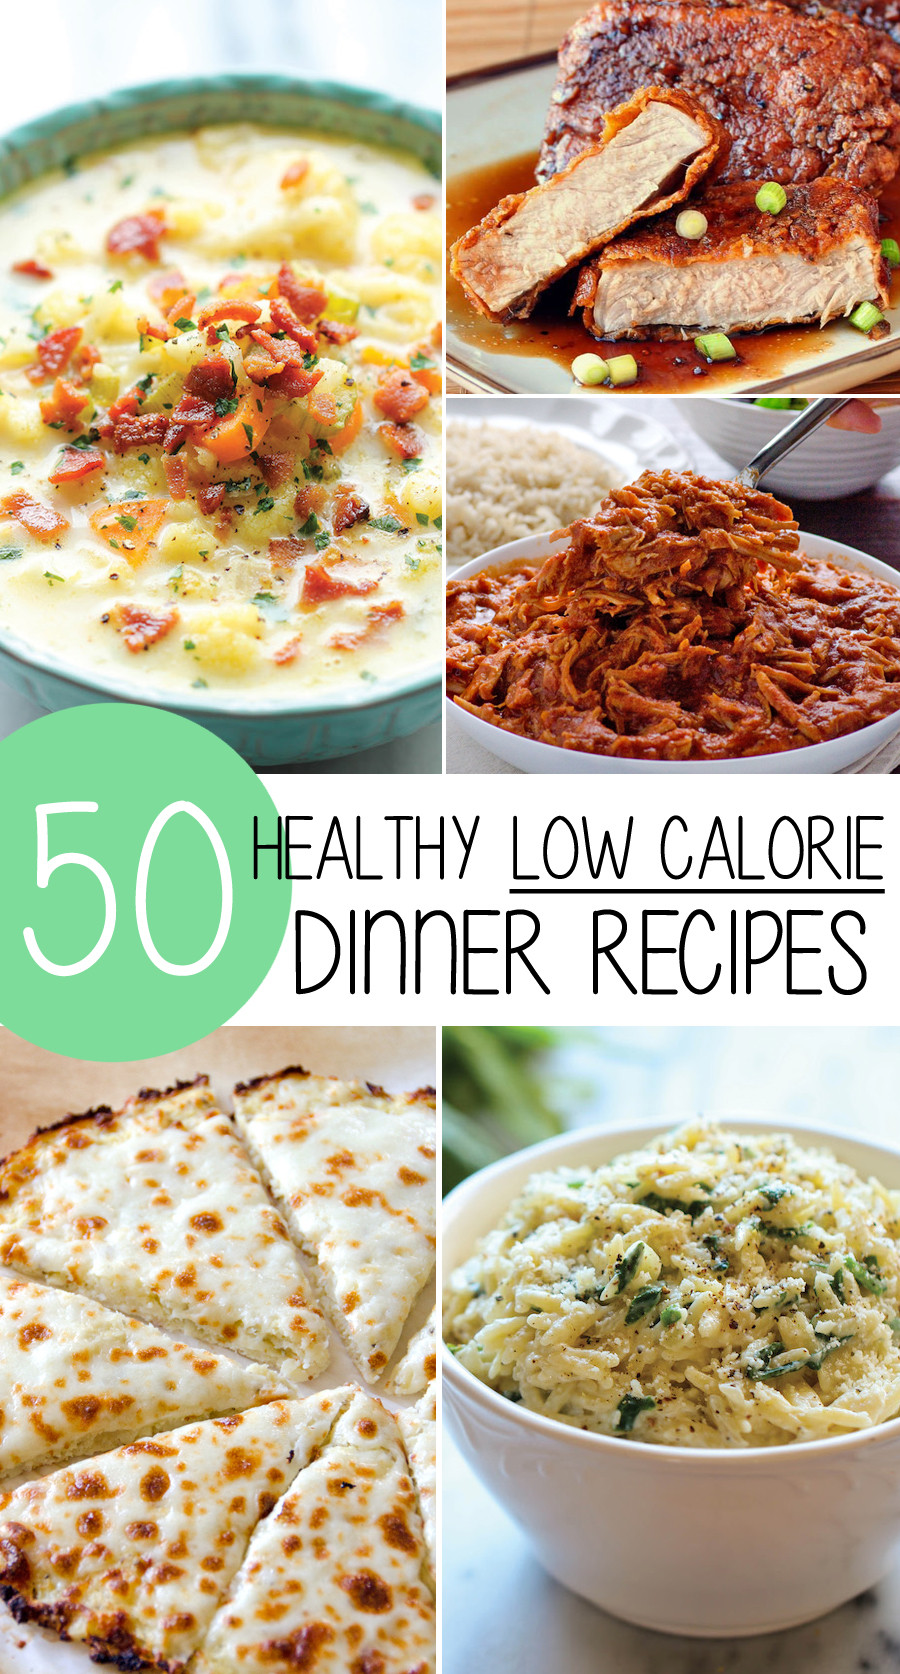 Low Calorie Brunch Recipes
 50 Healthy Low Calorie Weight Loss Dinner Recipes